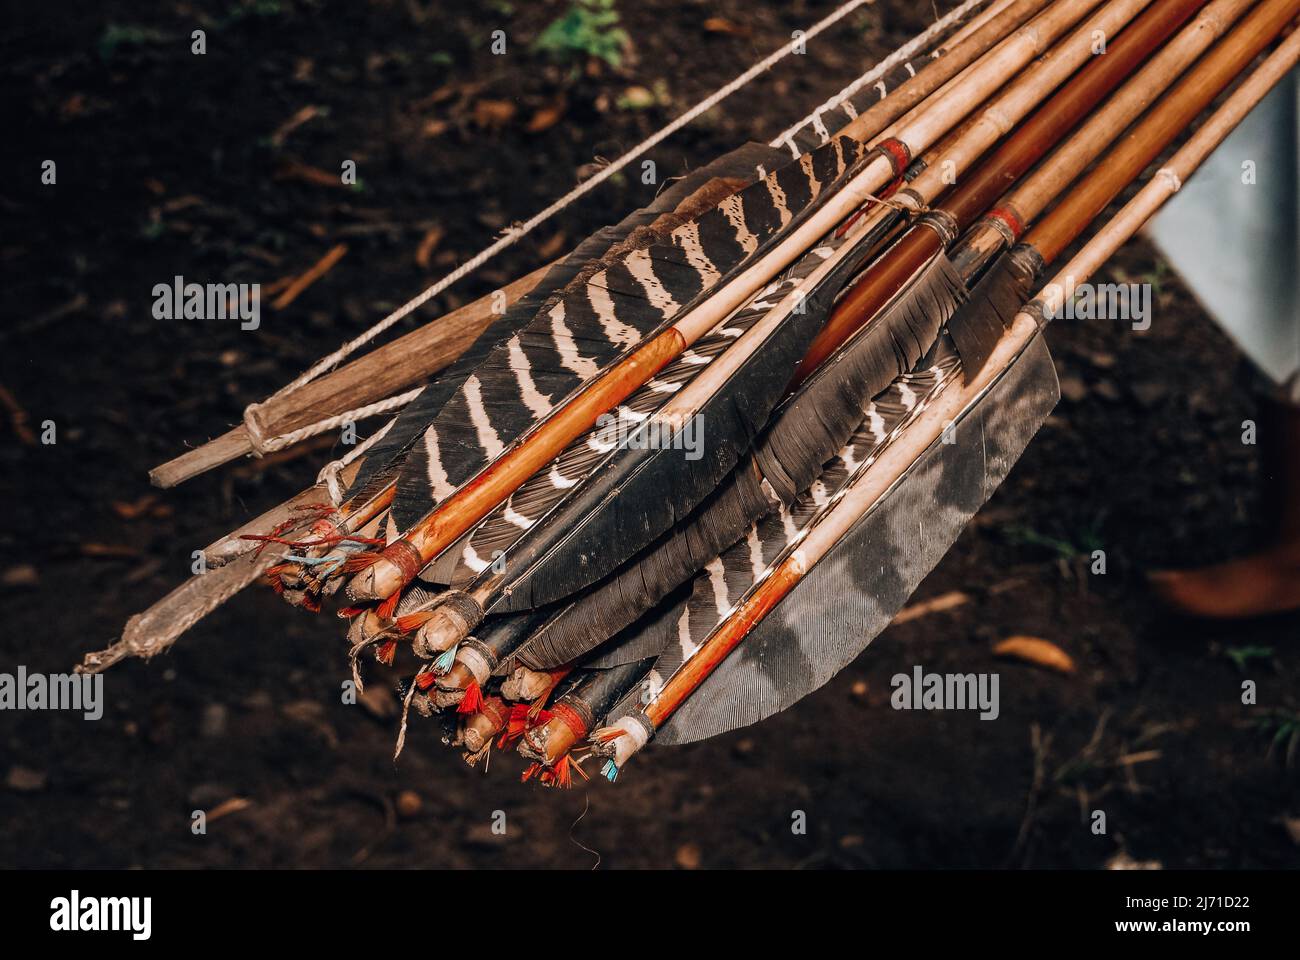 Hand made feathered indian arrows crafted by indians of the Arara tribe, Xingu River, Amazon, Brazil. Stock Photo